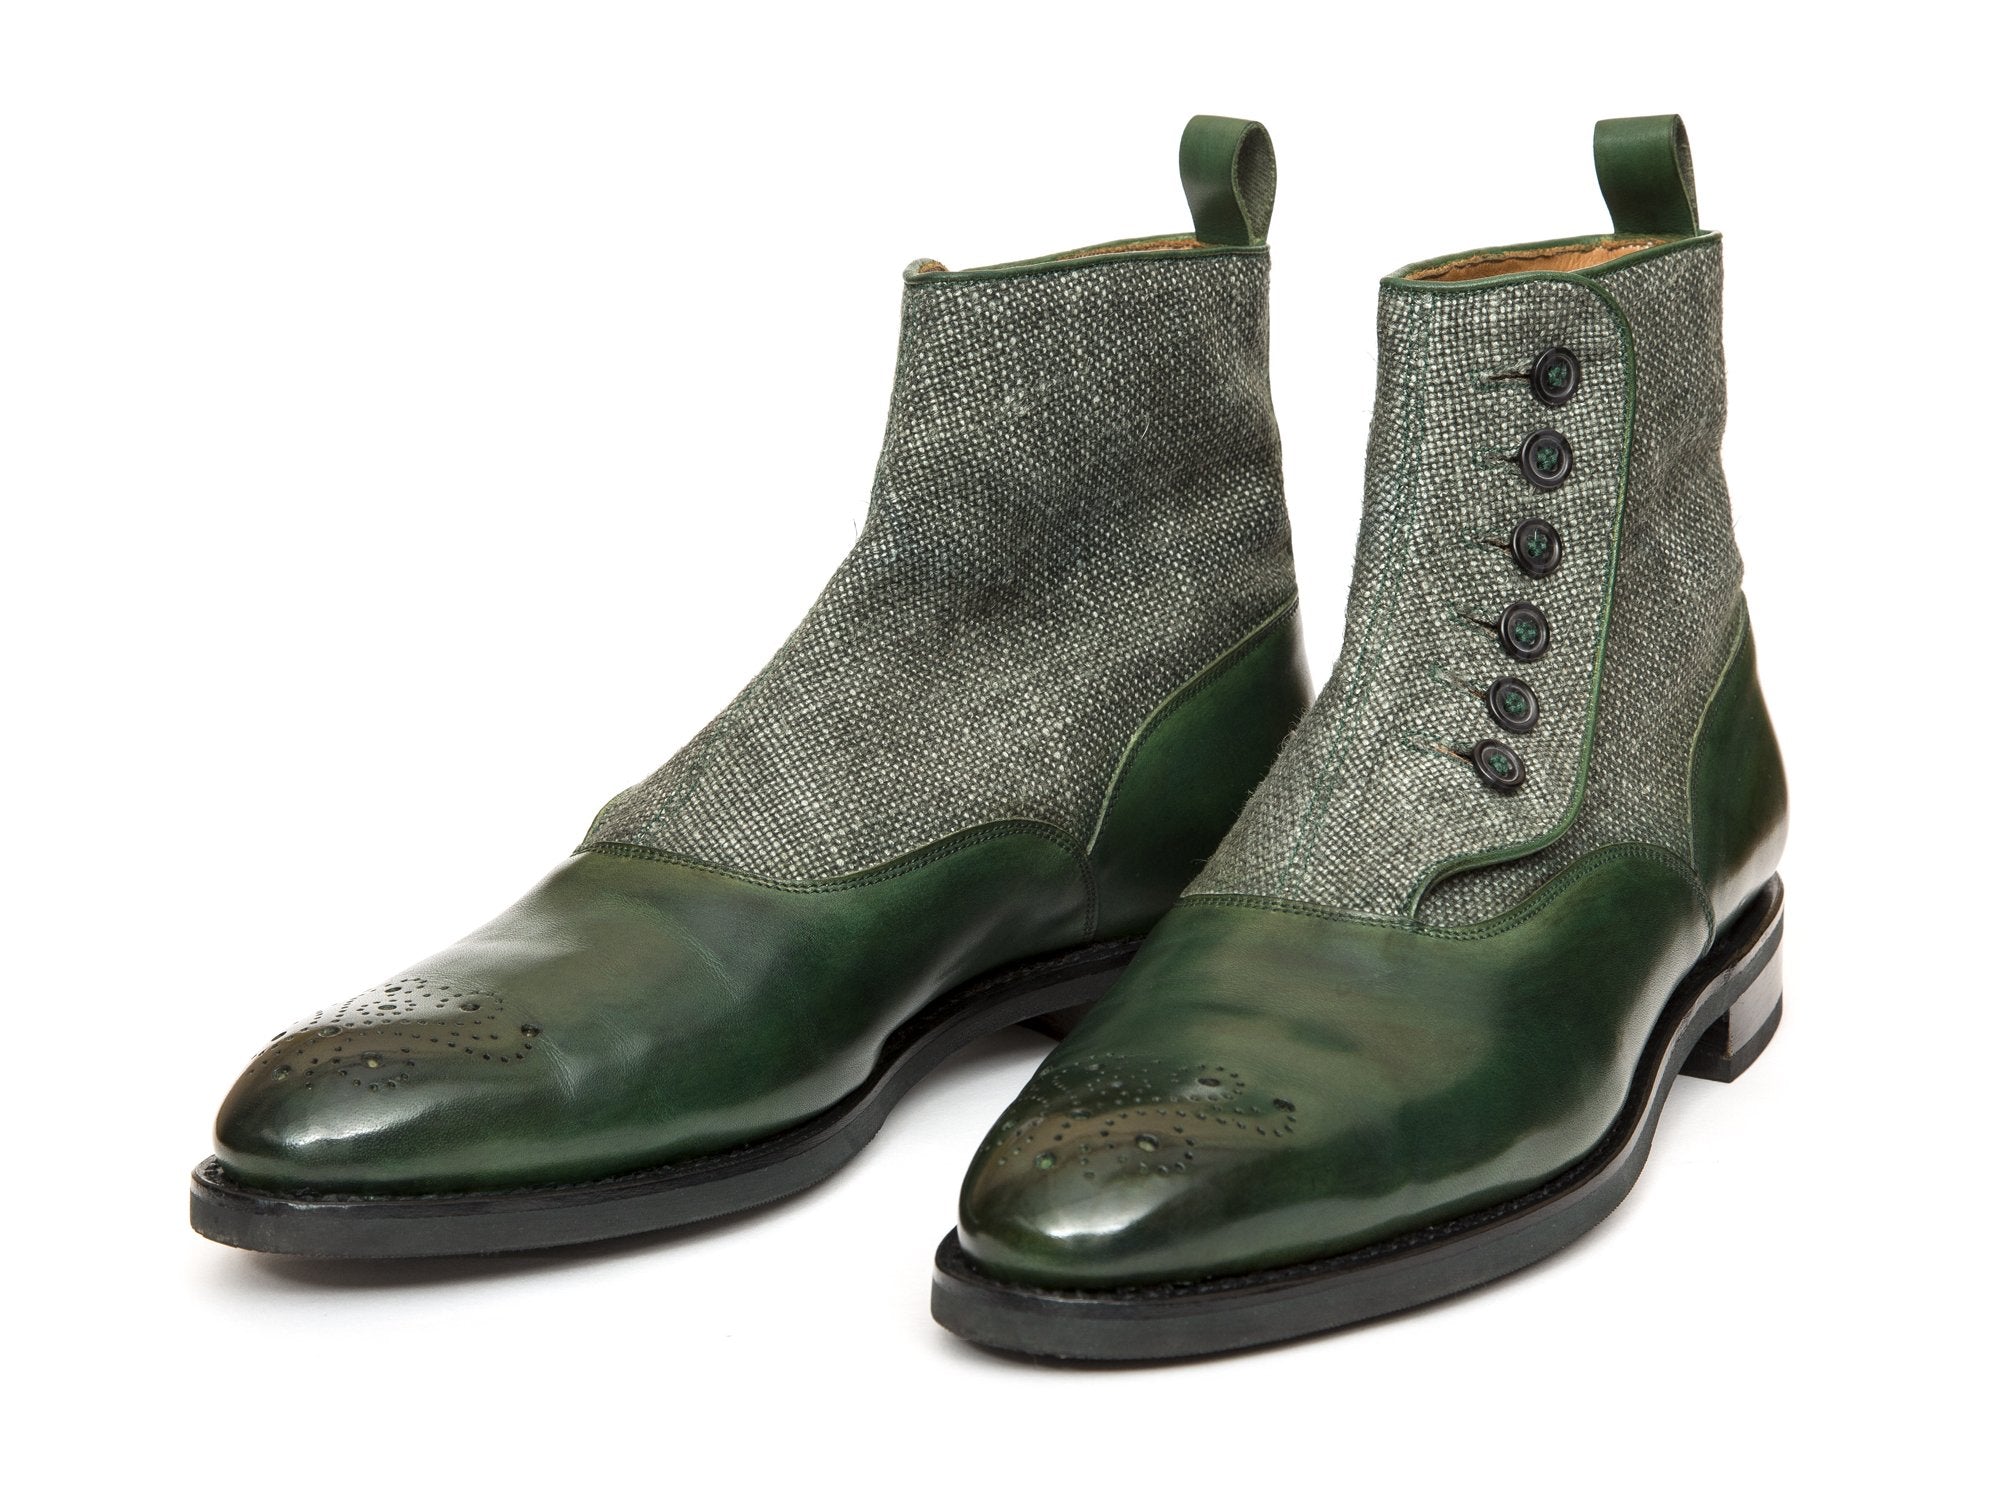 J.FitzPatrick Footwear - Westlake - Forest Green Calf / Military Canvas - NGT Last - City Rubber Sole